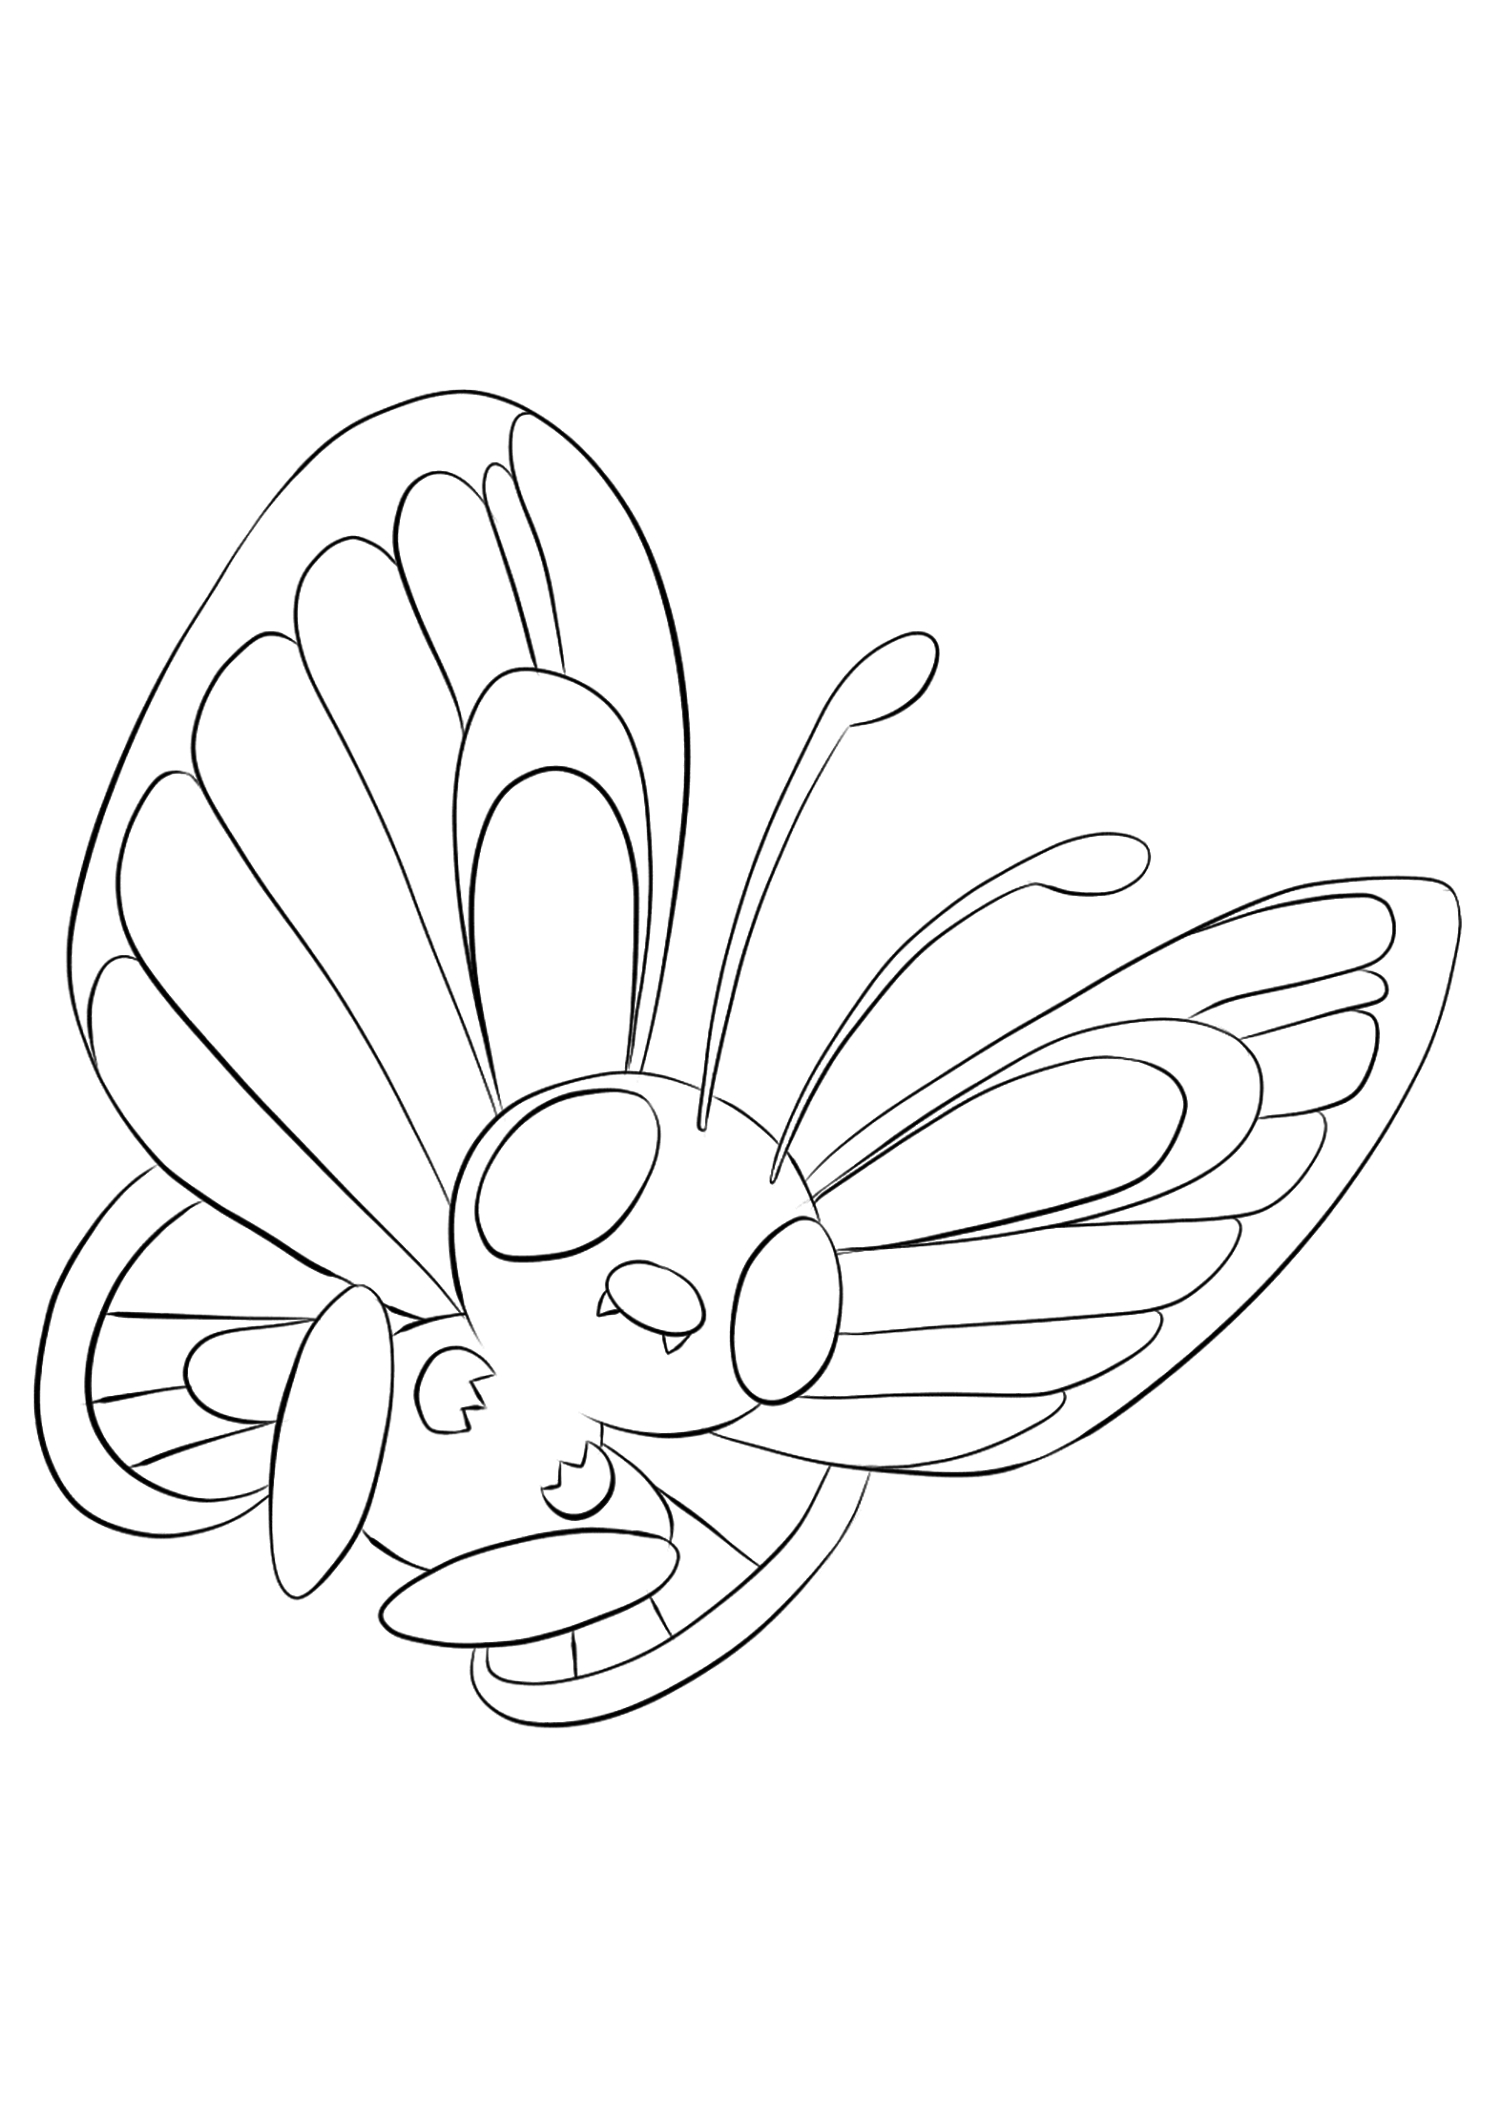 Butterfree (No.12). Butterfree Coloring page, Generation I Pokemon of type Bug and FlyingOriginal image credit: Pokemon linearts by Lilly Gerbil'font-size:smaller;color:gray'>Permission: All rights reserved © Pokemon company and Ken Sugimori.